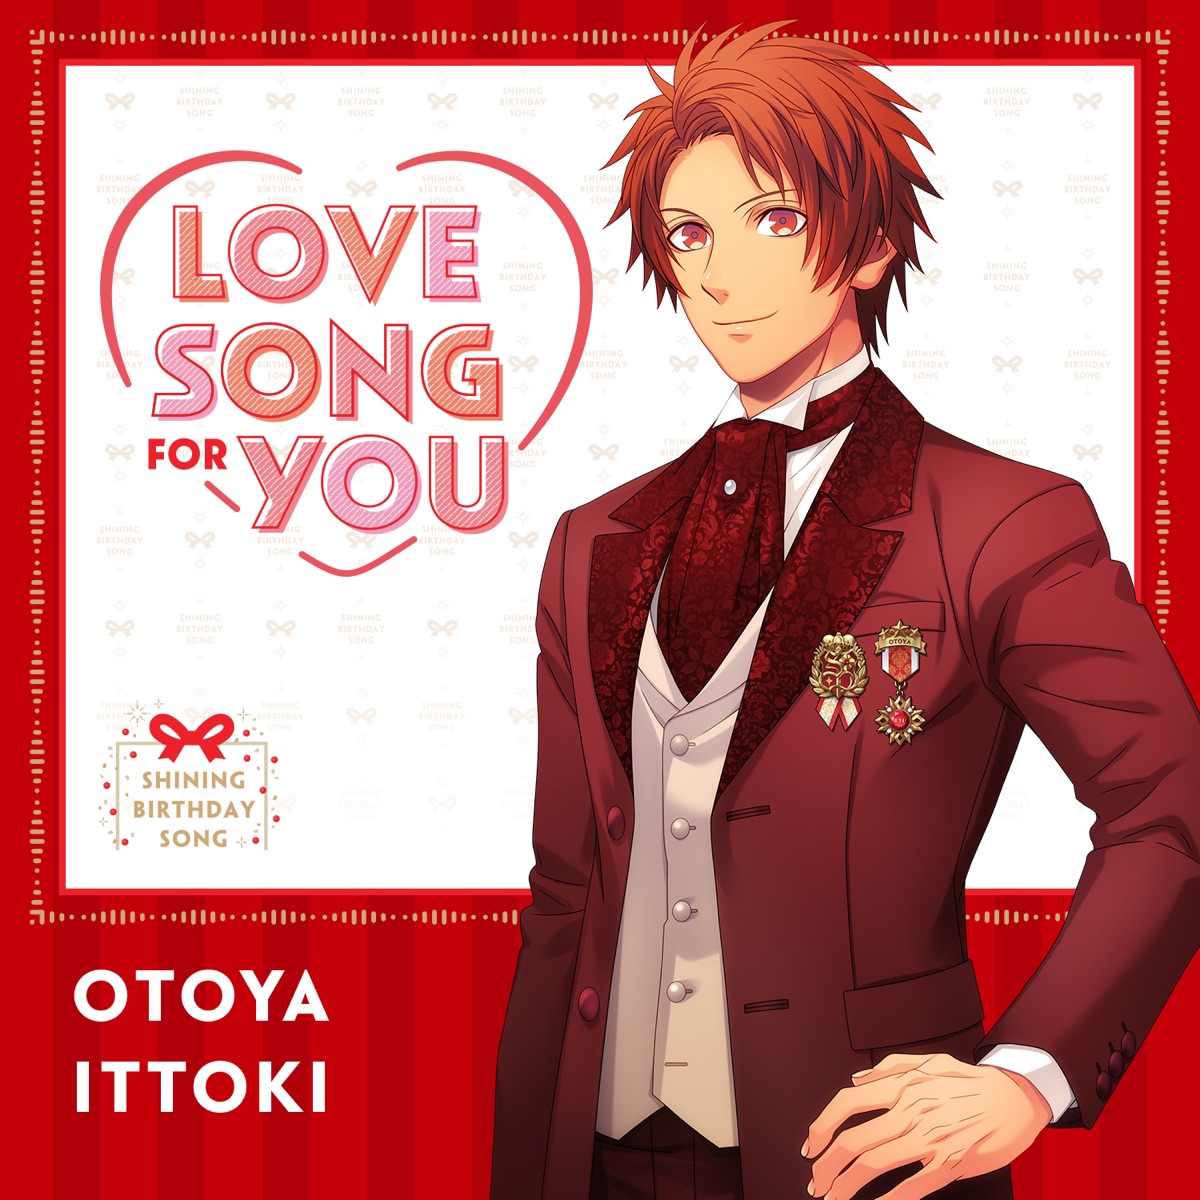 Cover art for『Otoya Ittoki (Takuma Terashima) - LOVE SONG FOR YOU』from the release『LOVE SONG FOR YOU